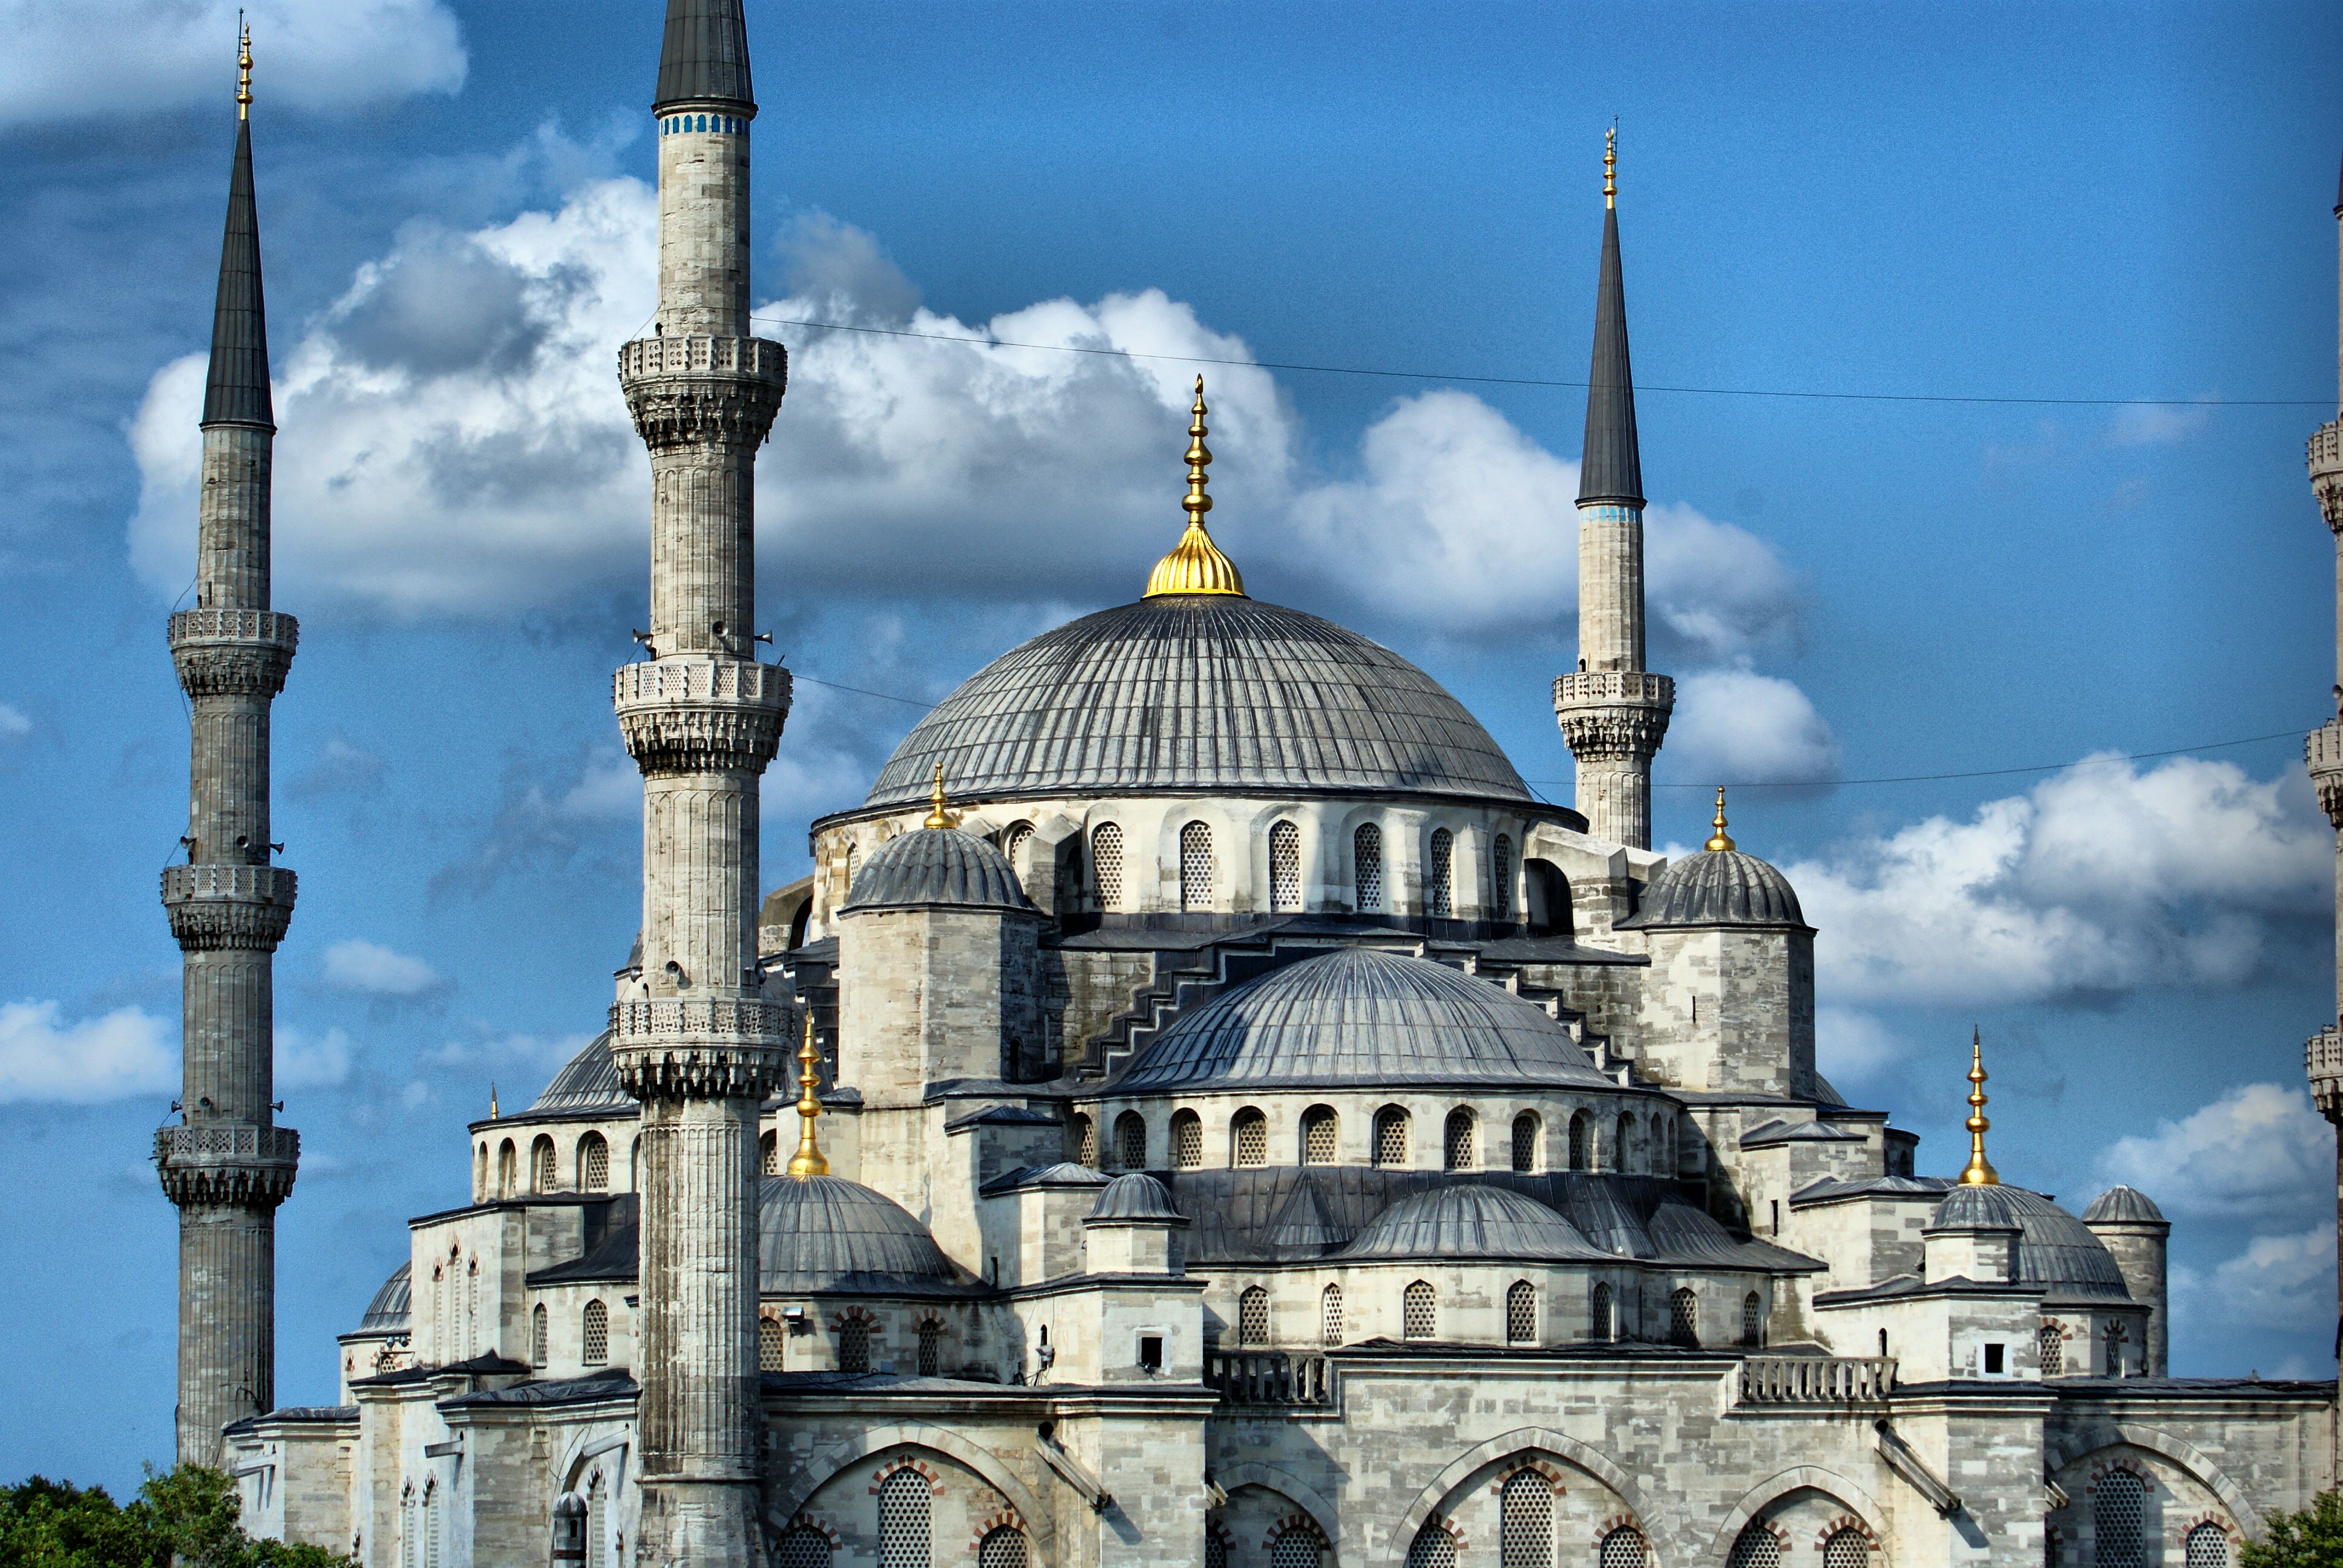 Sultan Ahmed Mosque wallpaper, Religious, HQ Sultan Ahmed Mosque pictureK Wallpaper 2019